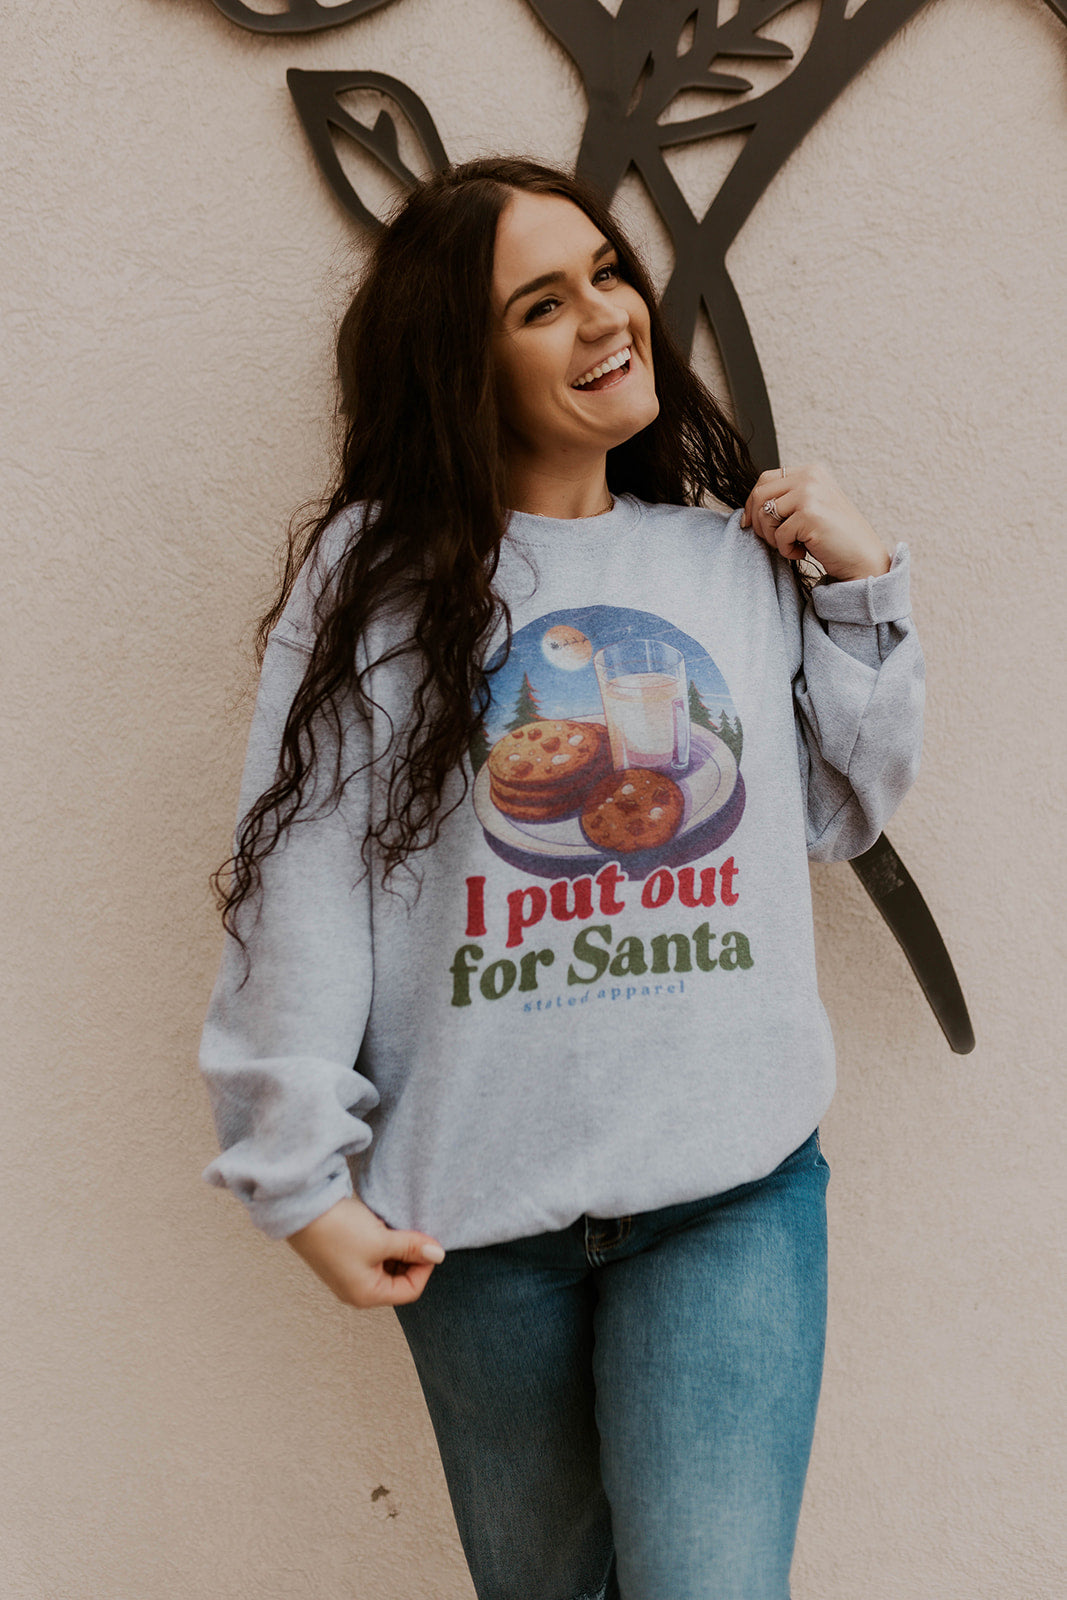 Christmas Sweatshirt that says "I put out for Santa" with Milk & Cookies